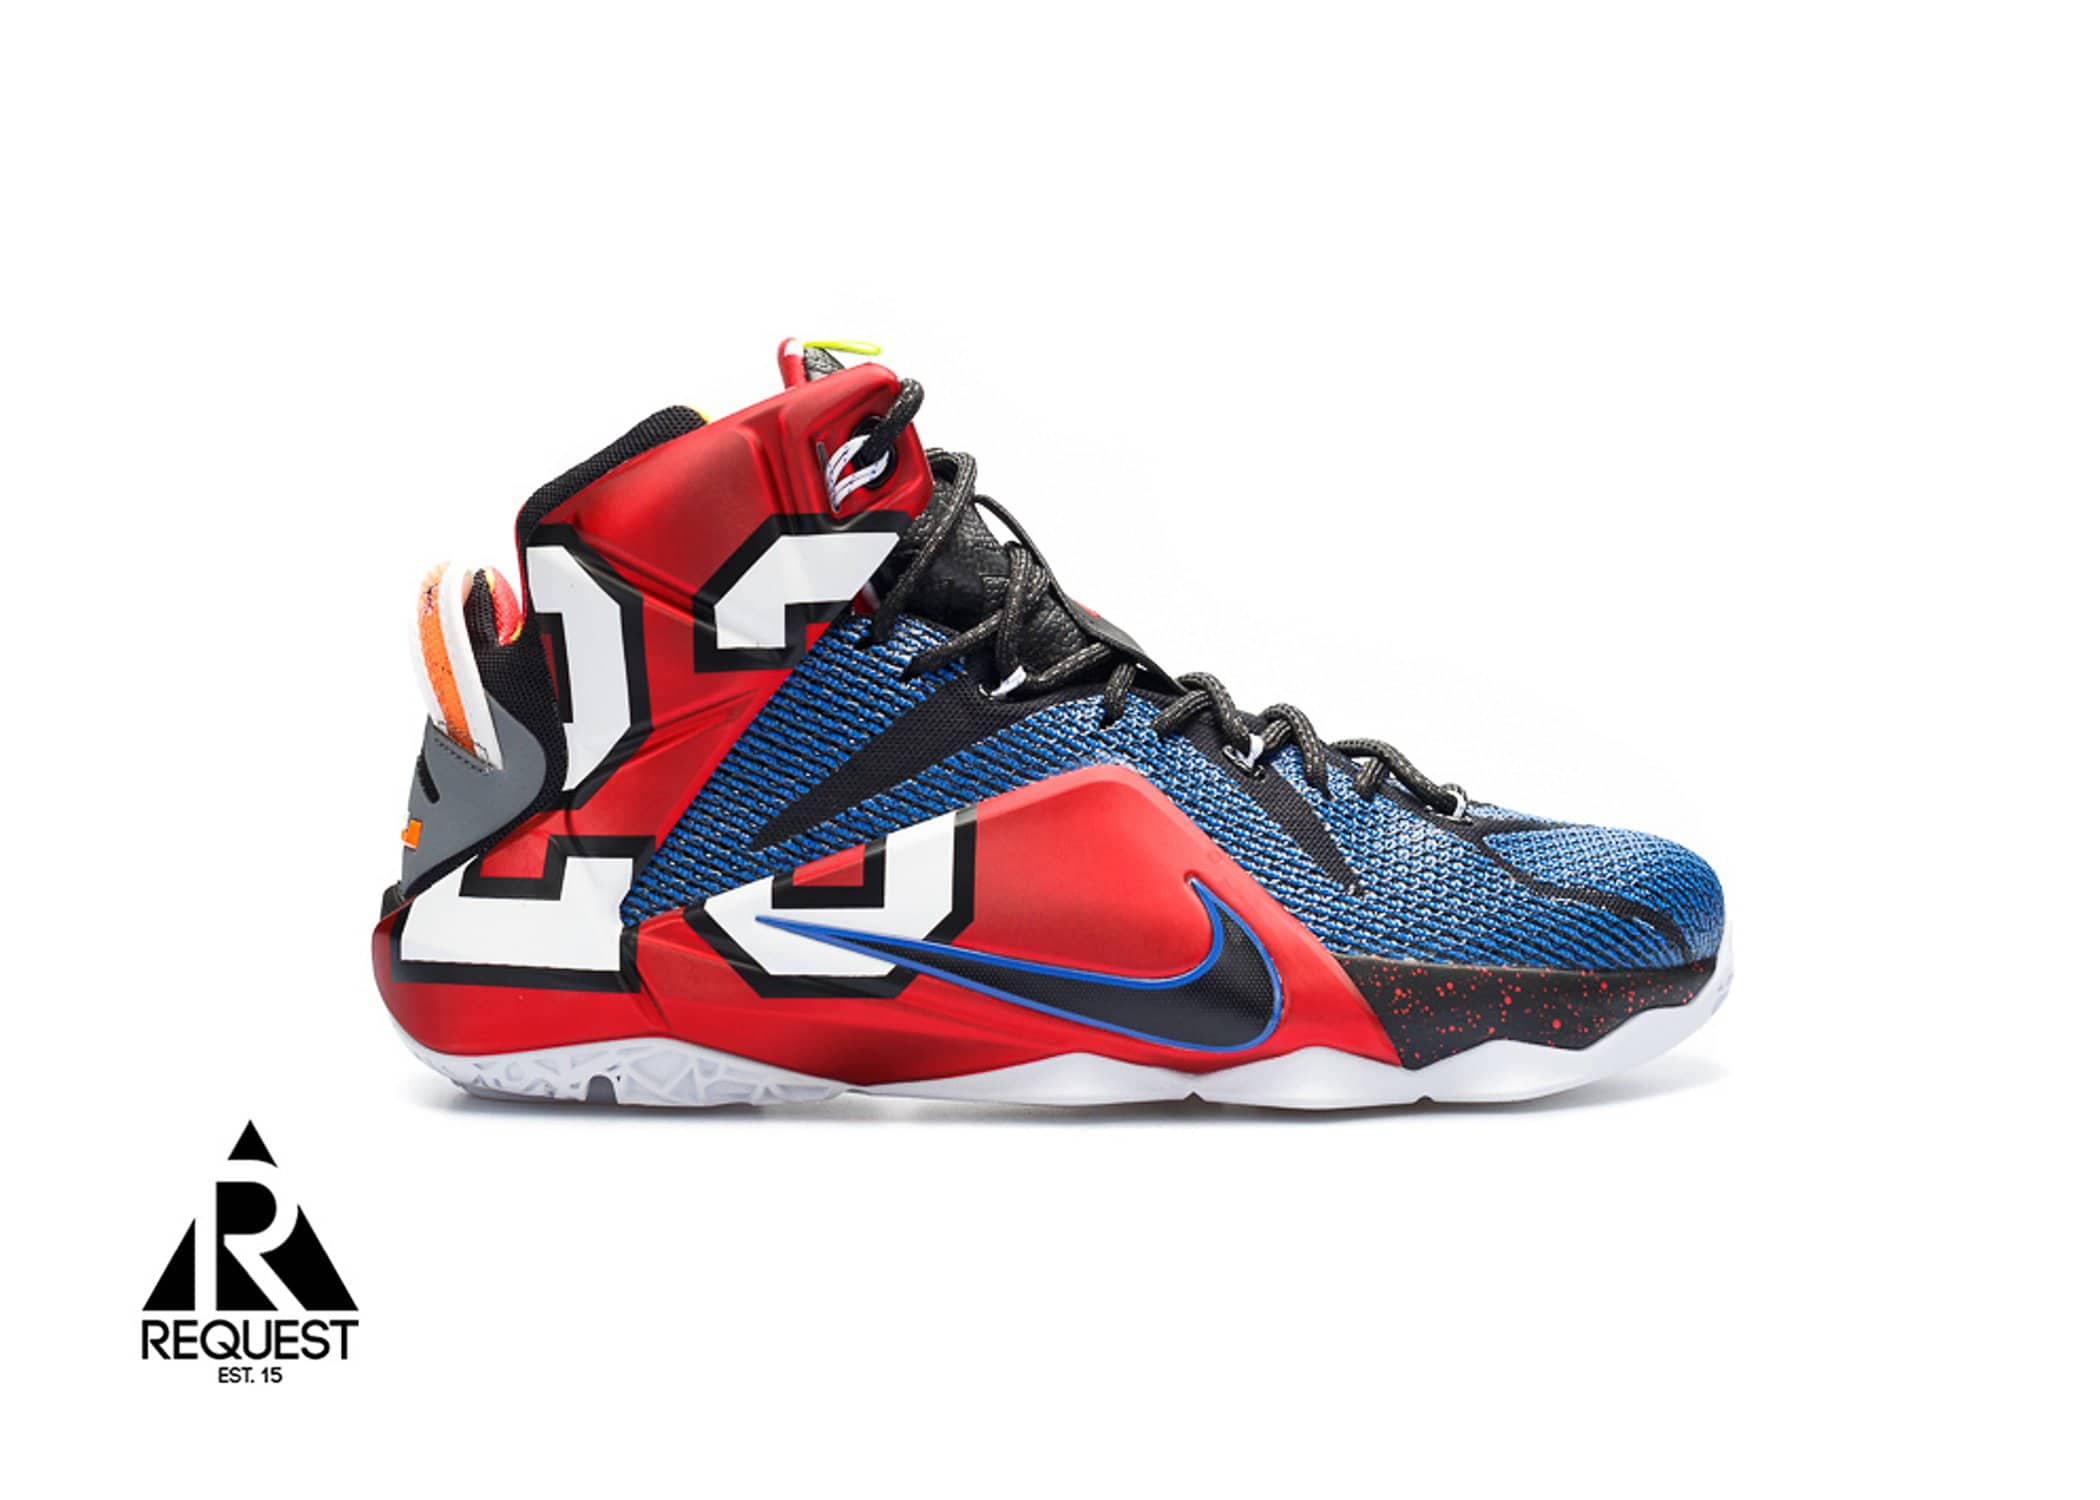 LeBron 12 “What The”